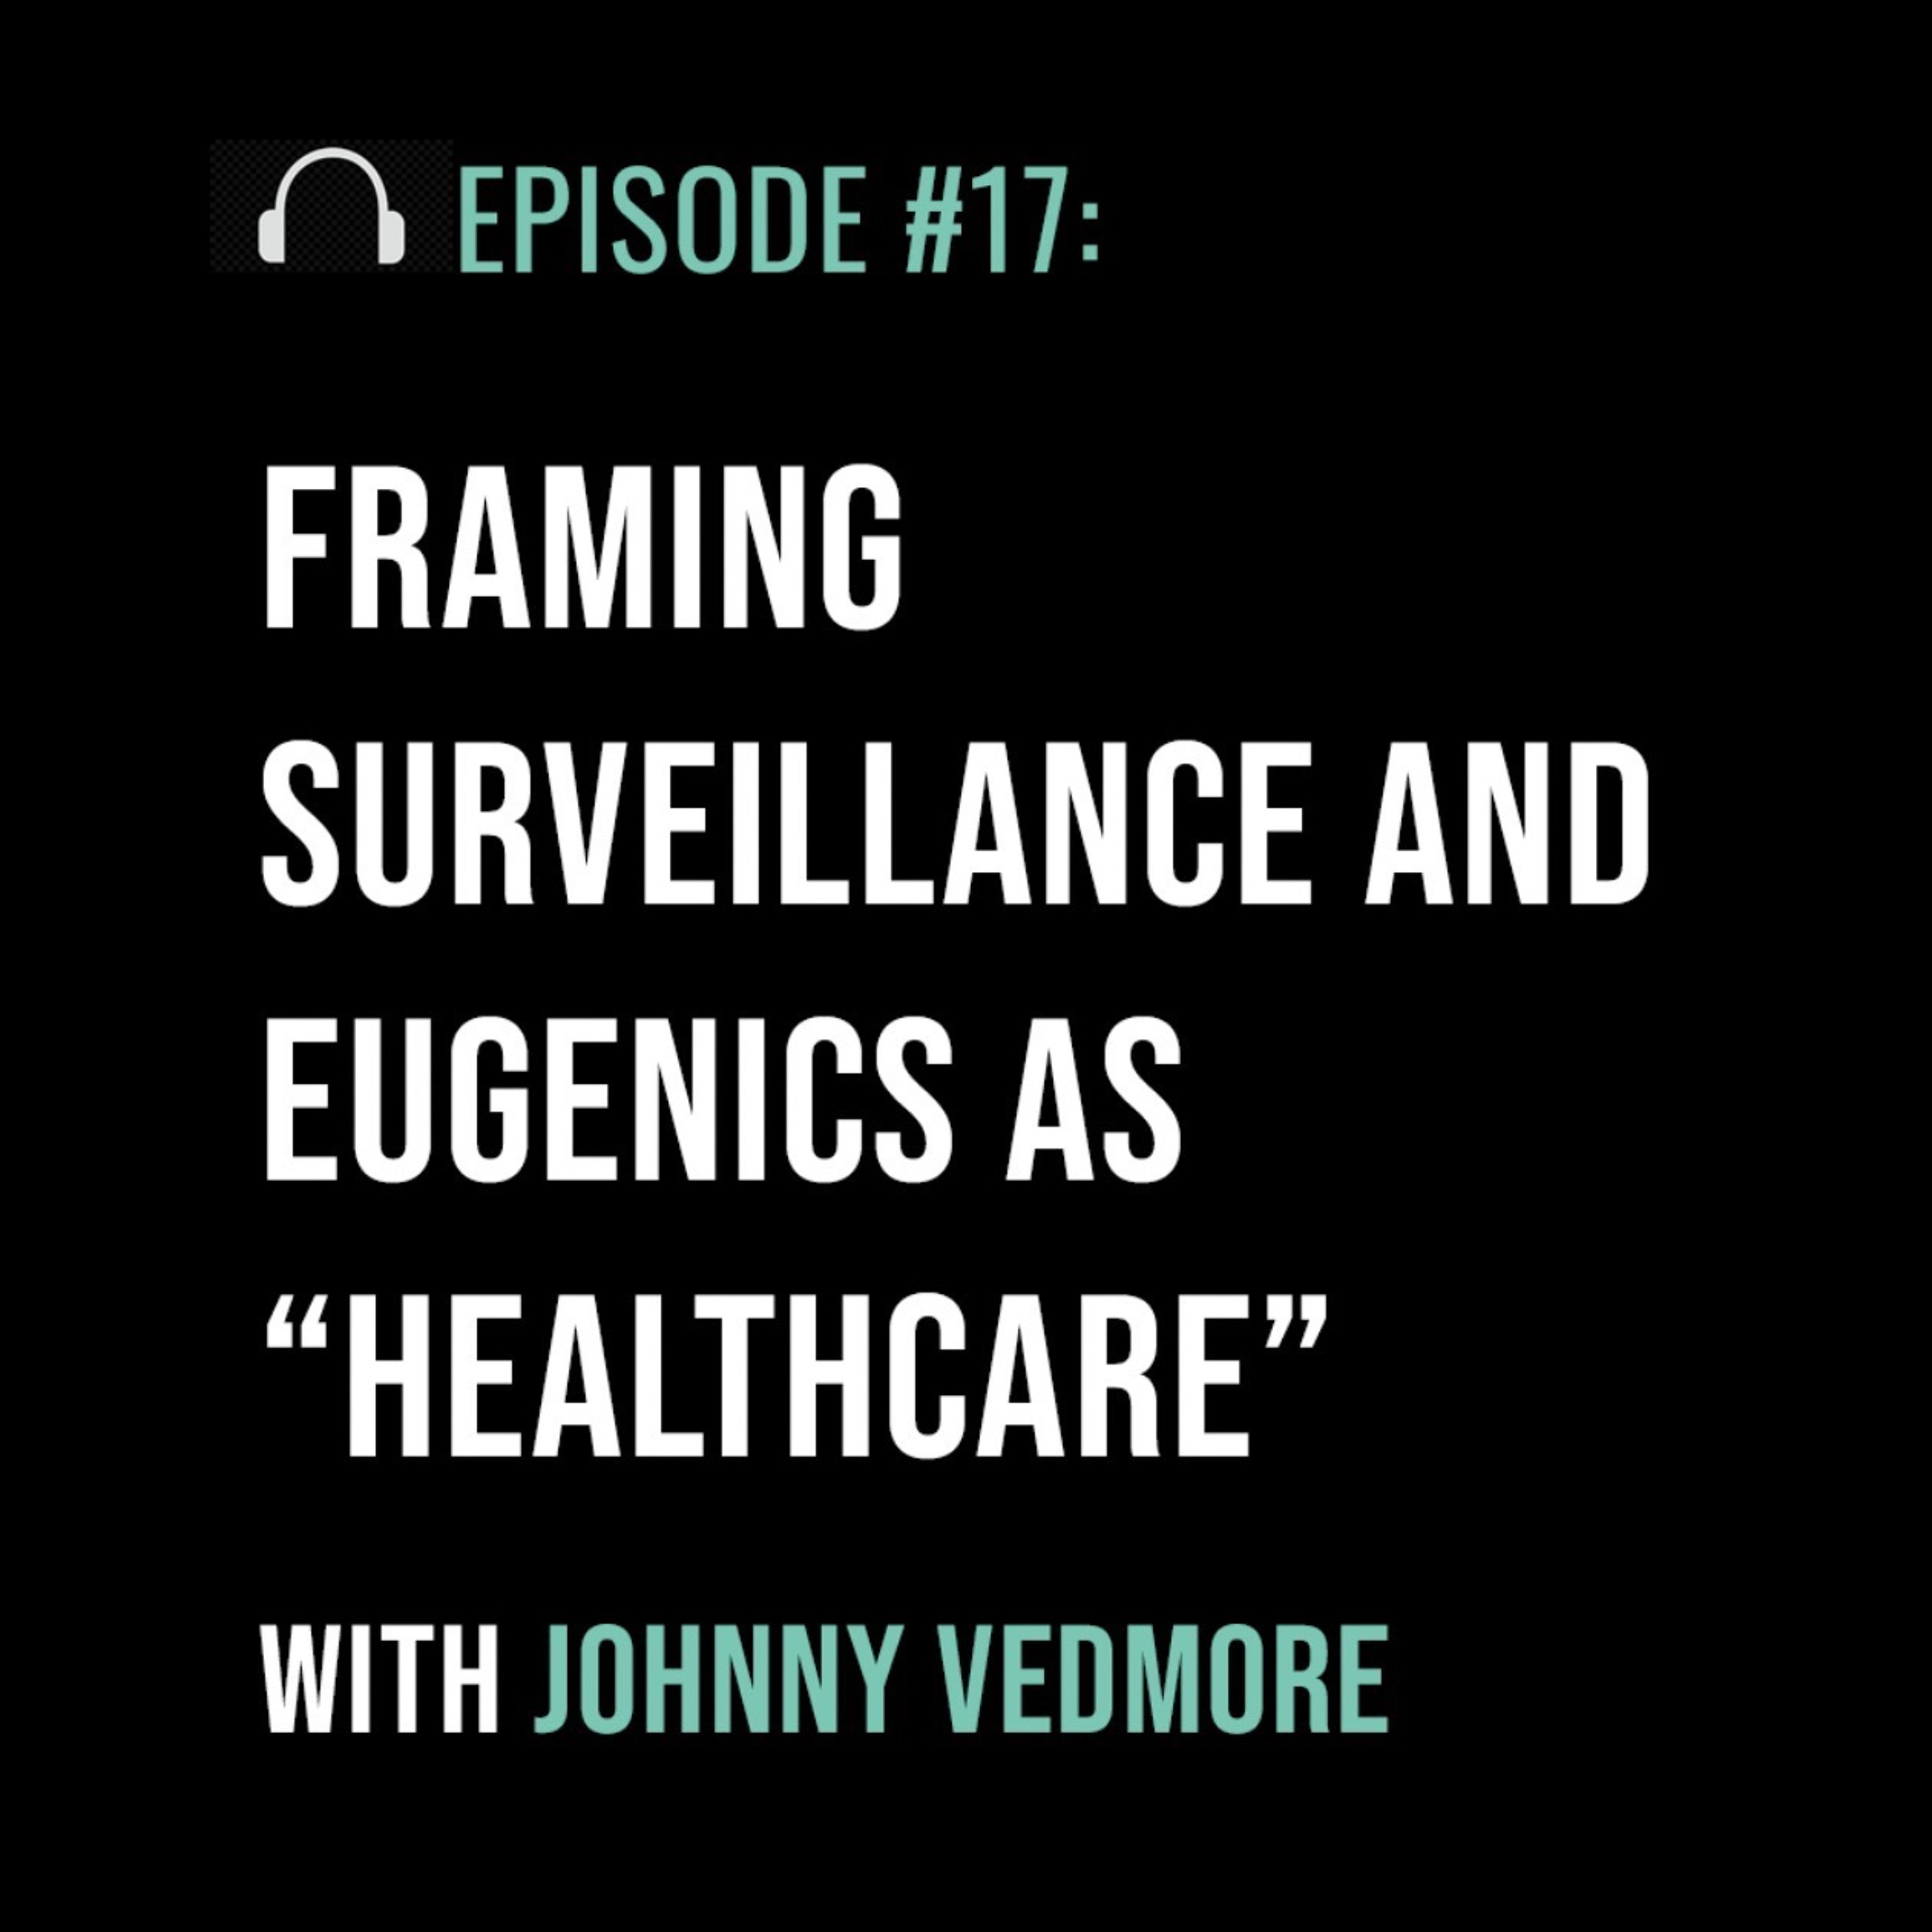 Framing Surveillance and Eugenics as “Healthcare” with Johnny Vedmore